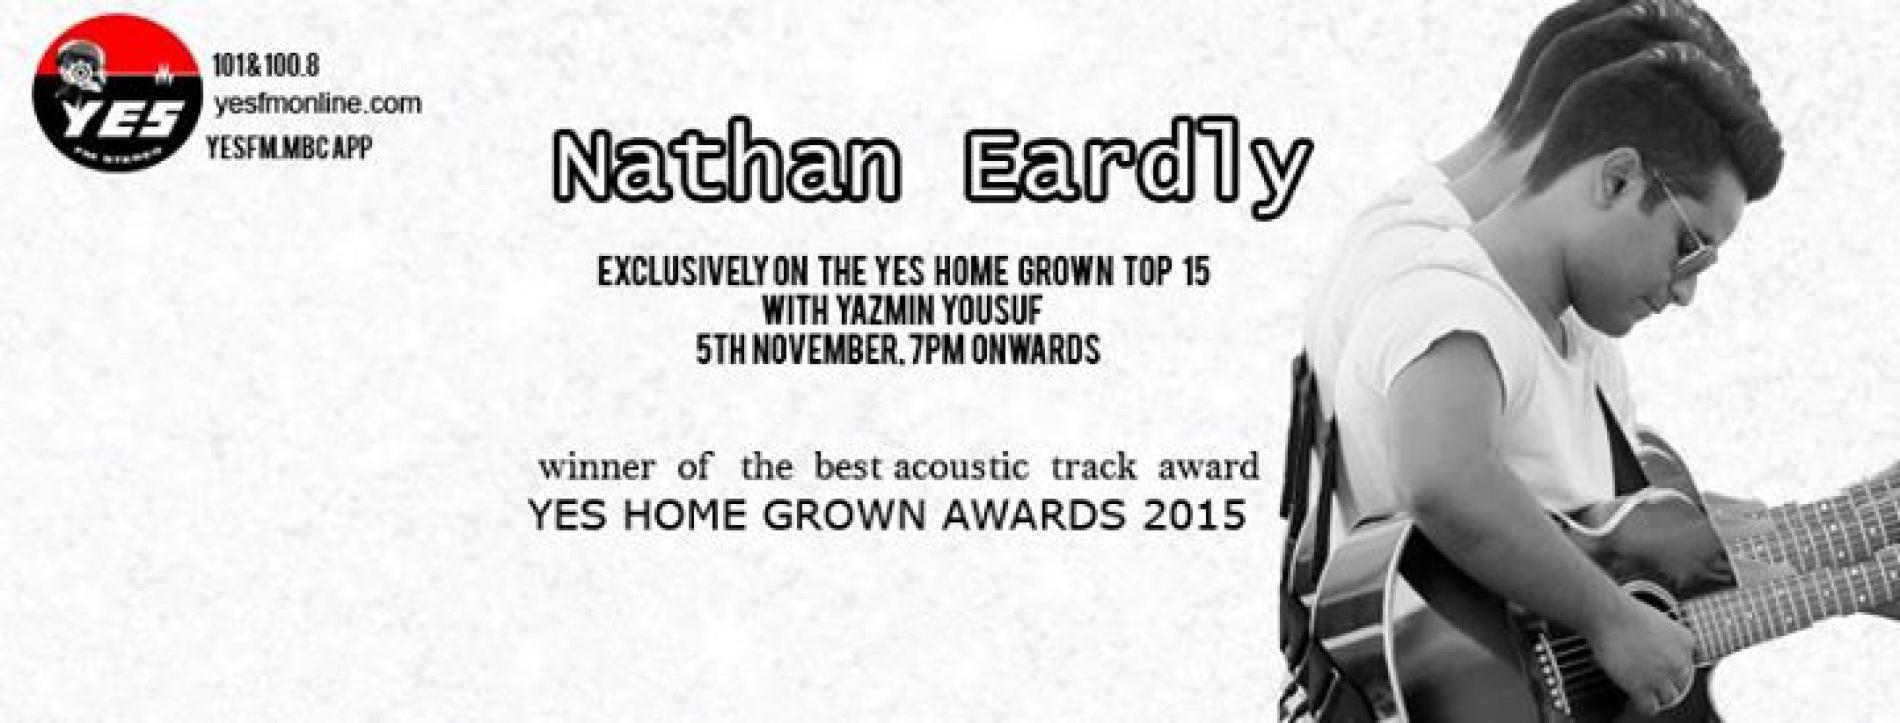 Nathan Eardly On The YES Home Grown Top 15